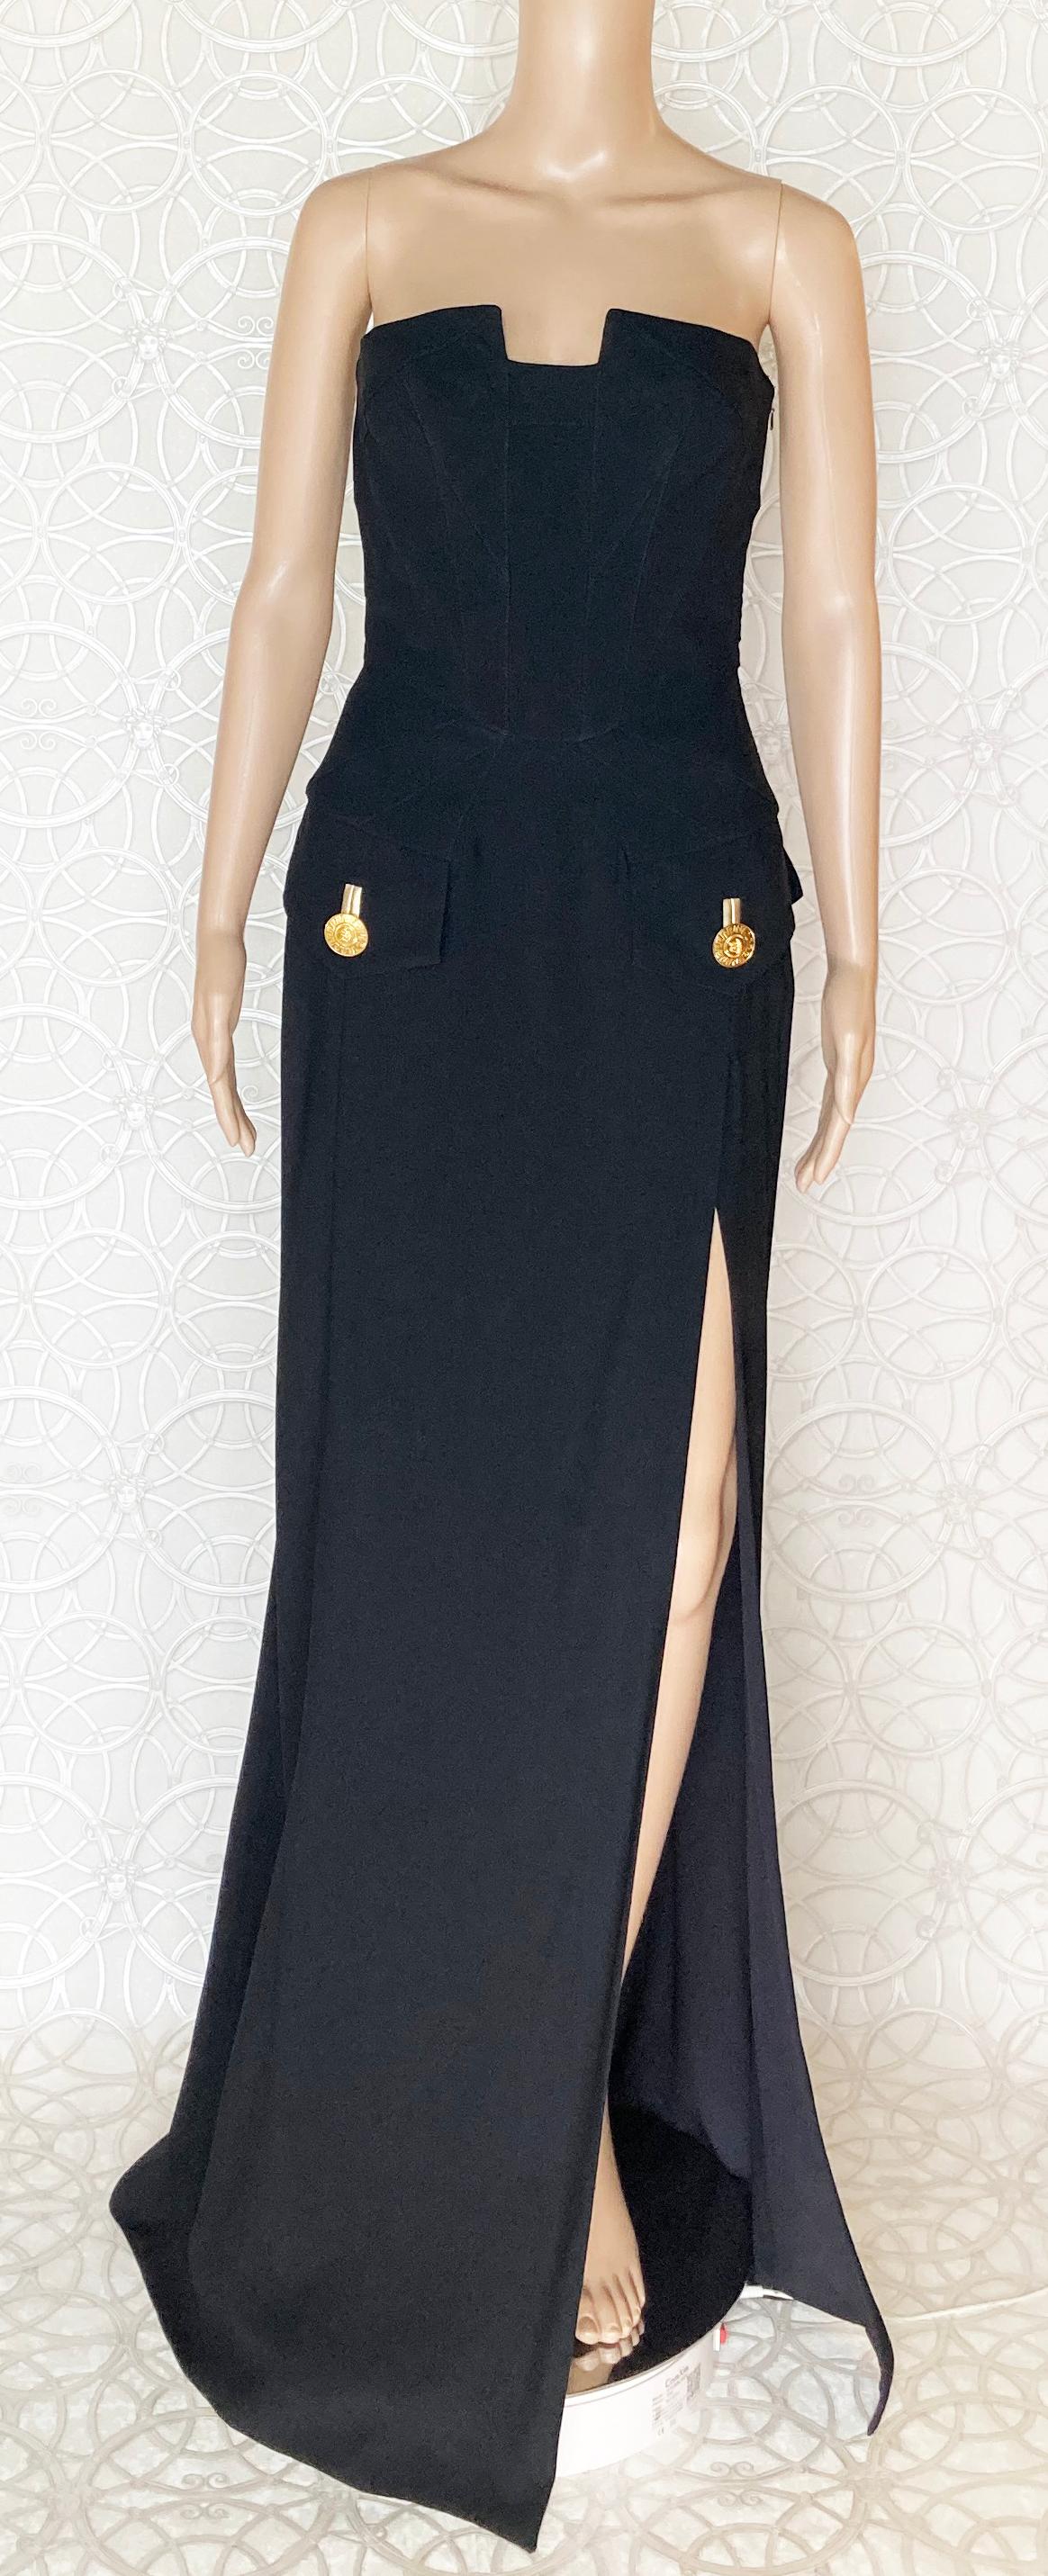 New VERSACE Black Long Dress Mila Kunis wore on the red carpet 40 - 4 For Sale 2